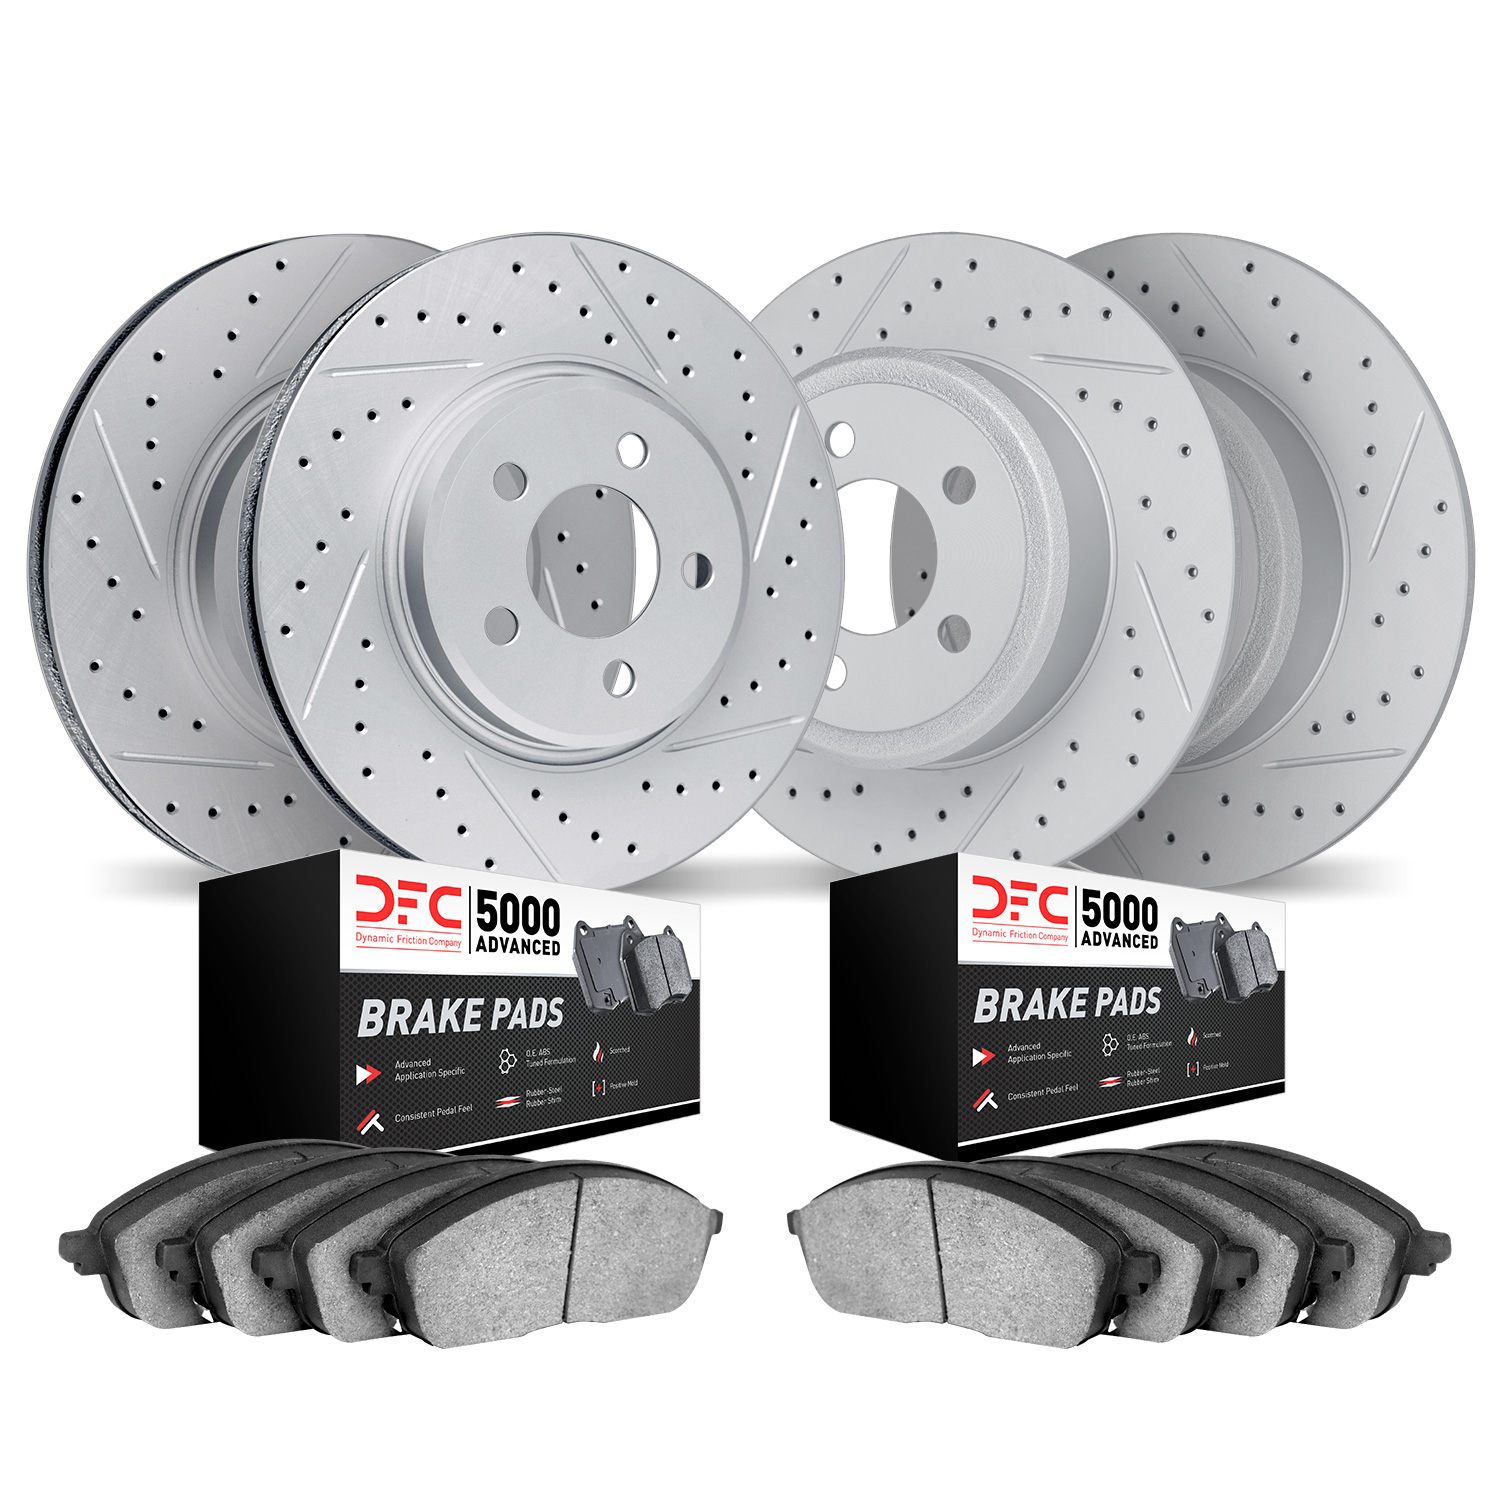 2504-40084 Geoperformance Drilled/Slotted Rotors w/5000 Advanced Brake Pads Kit, 2002-2006 Multiple Makes/Models, Position: Fron